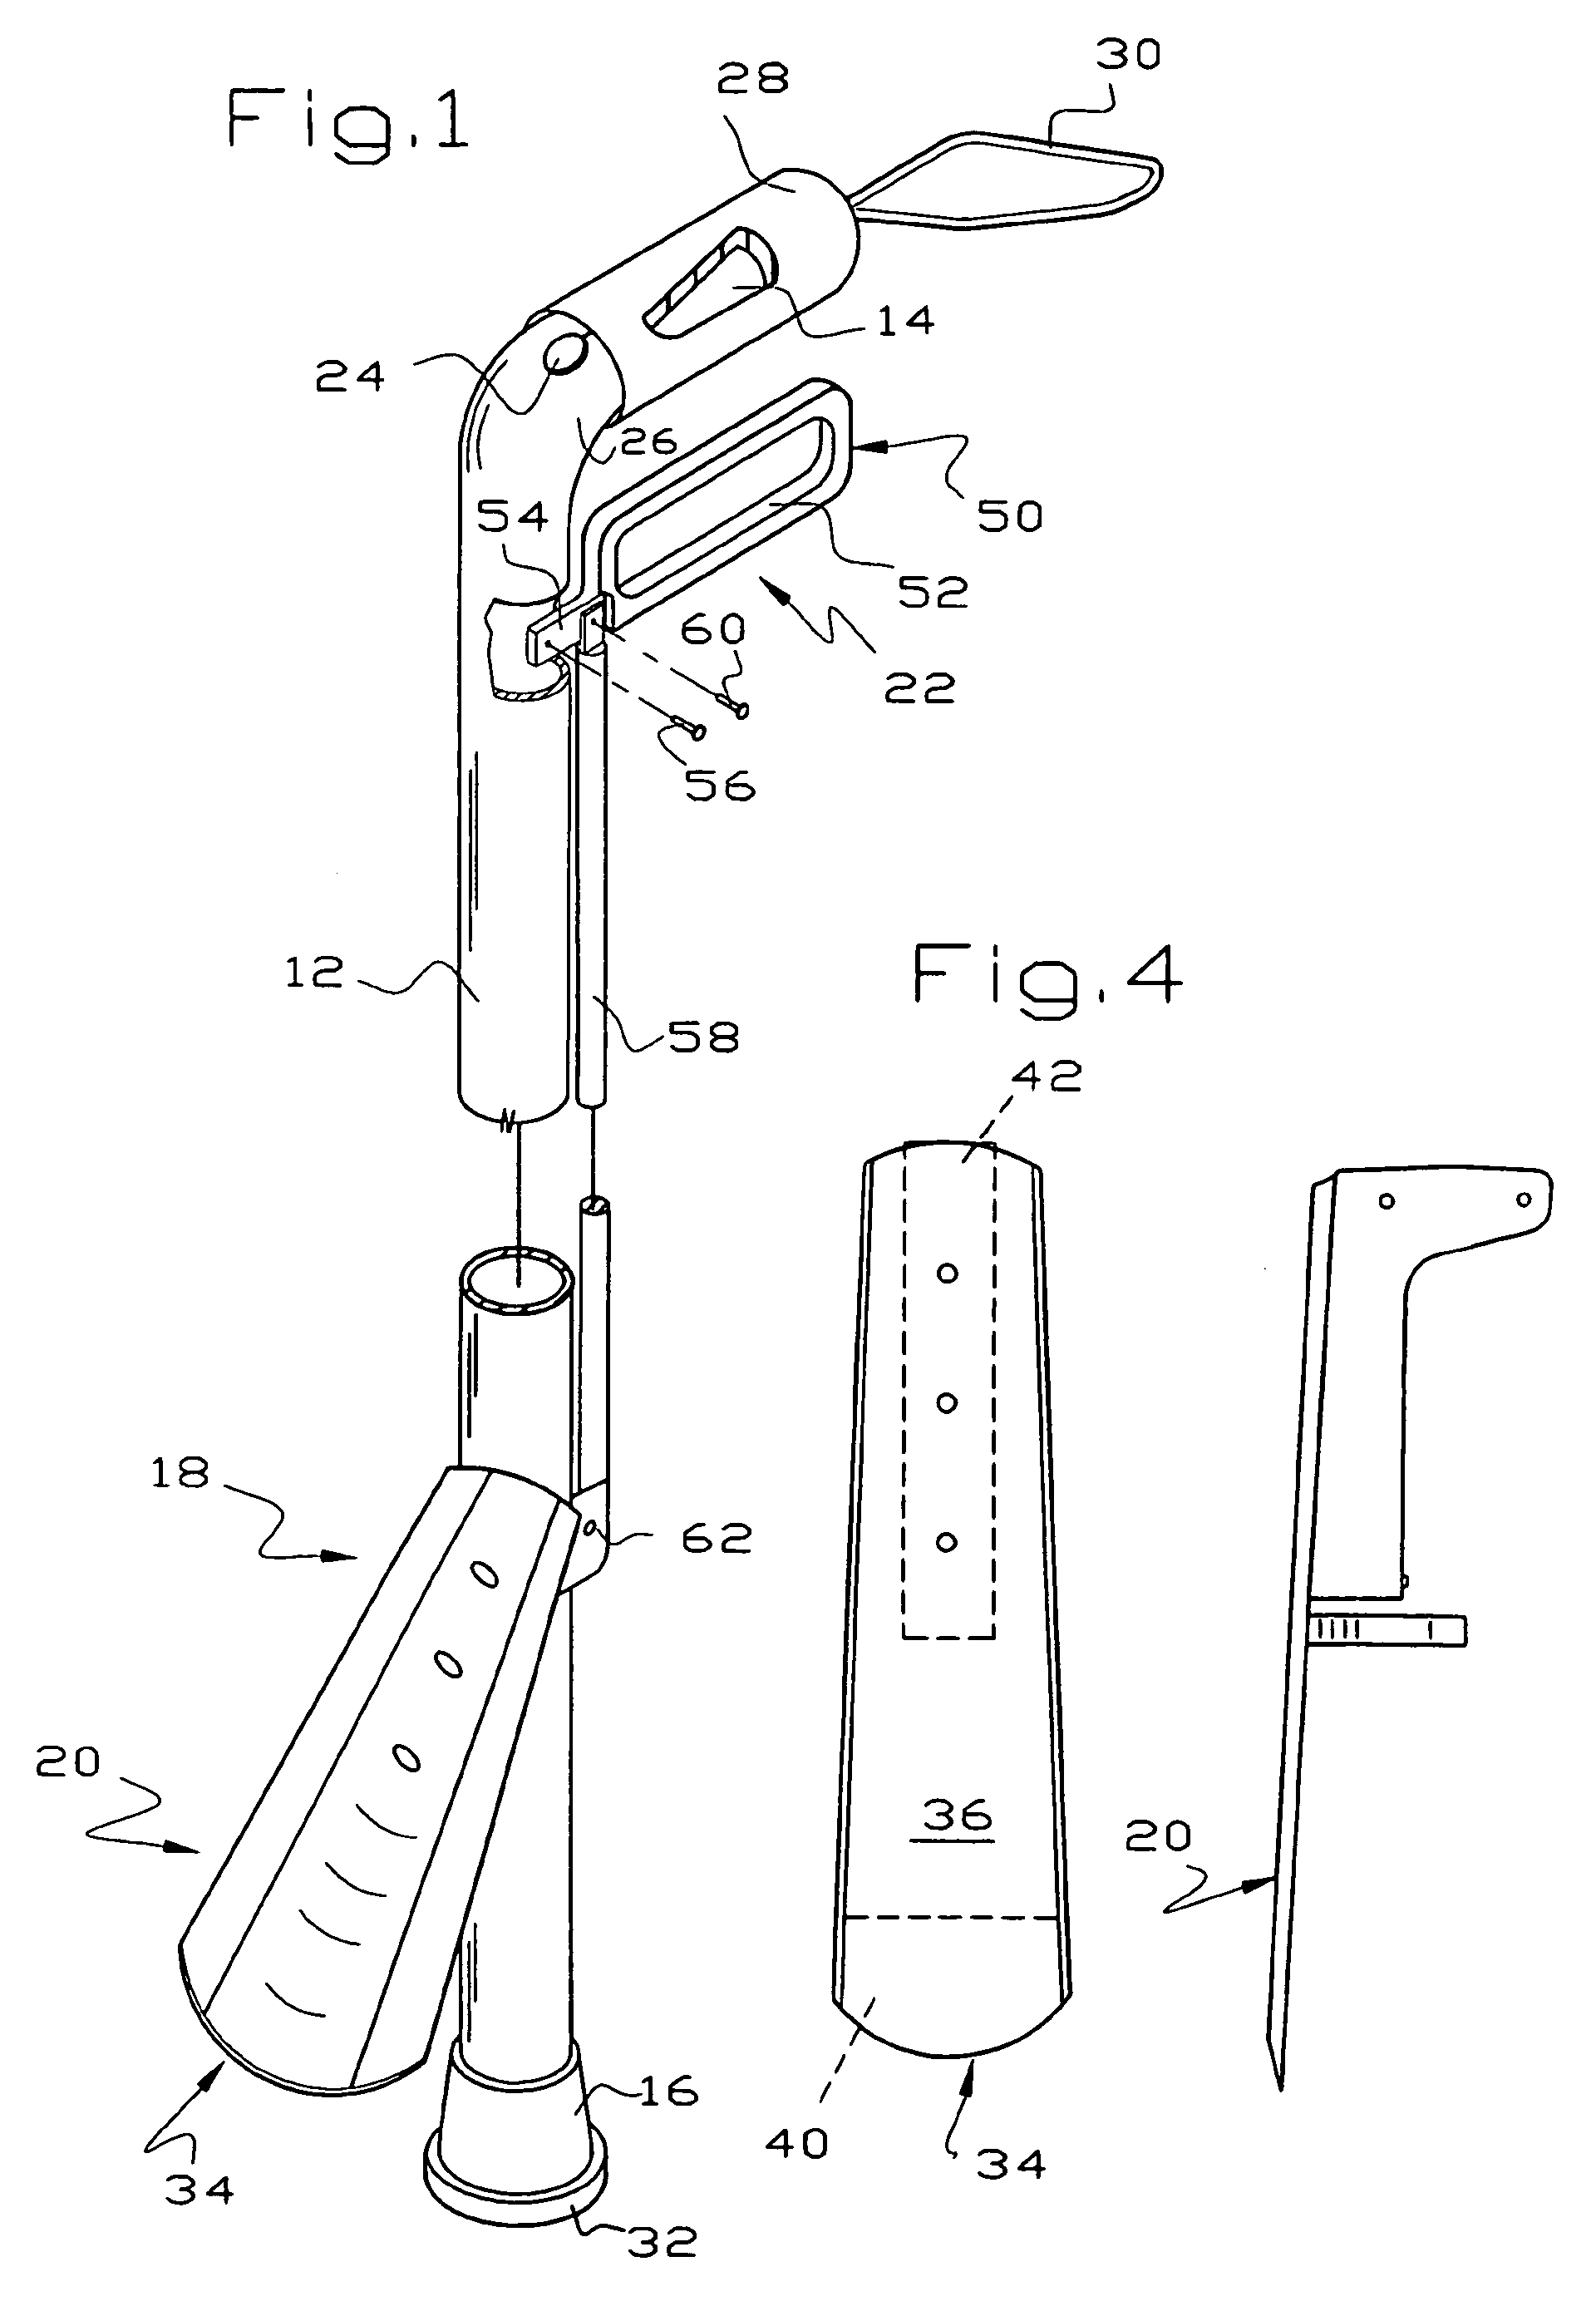 Walking support having shoehorn/gripper and magnet accessories